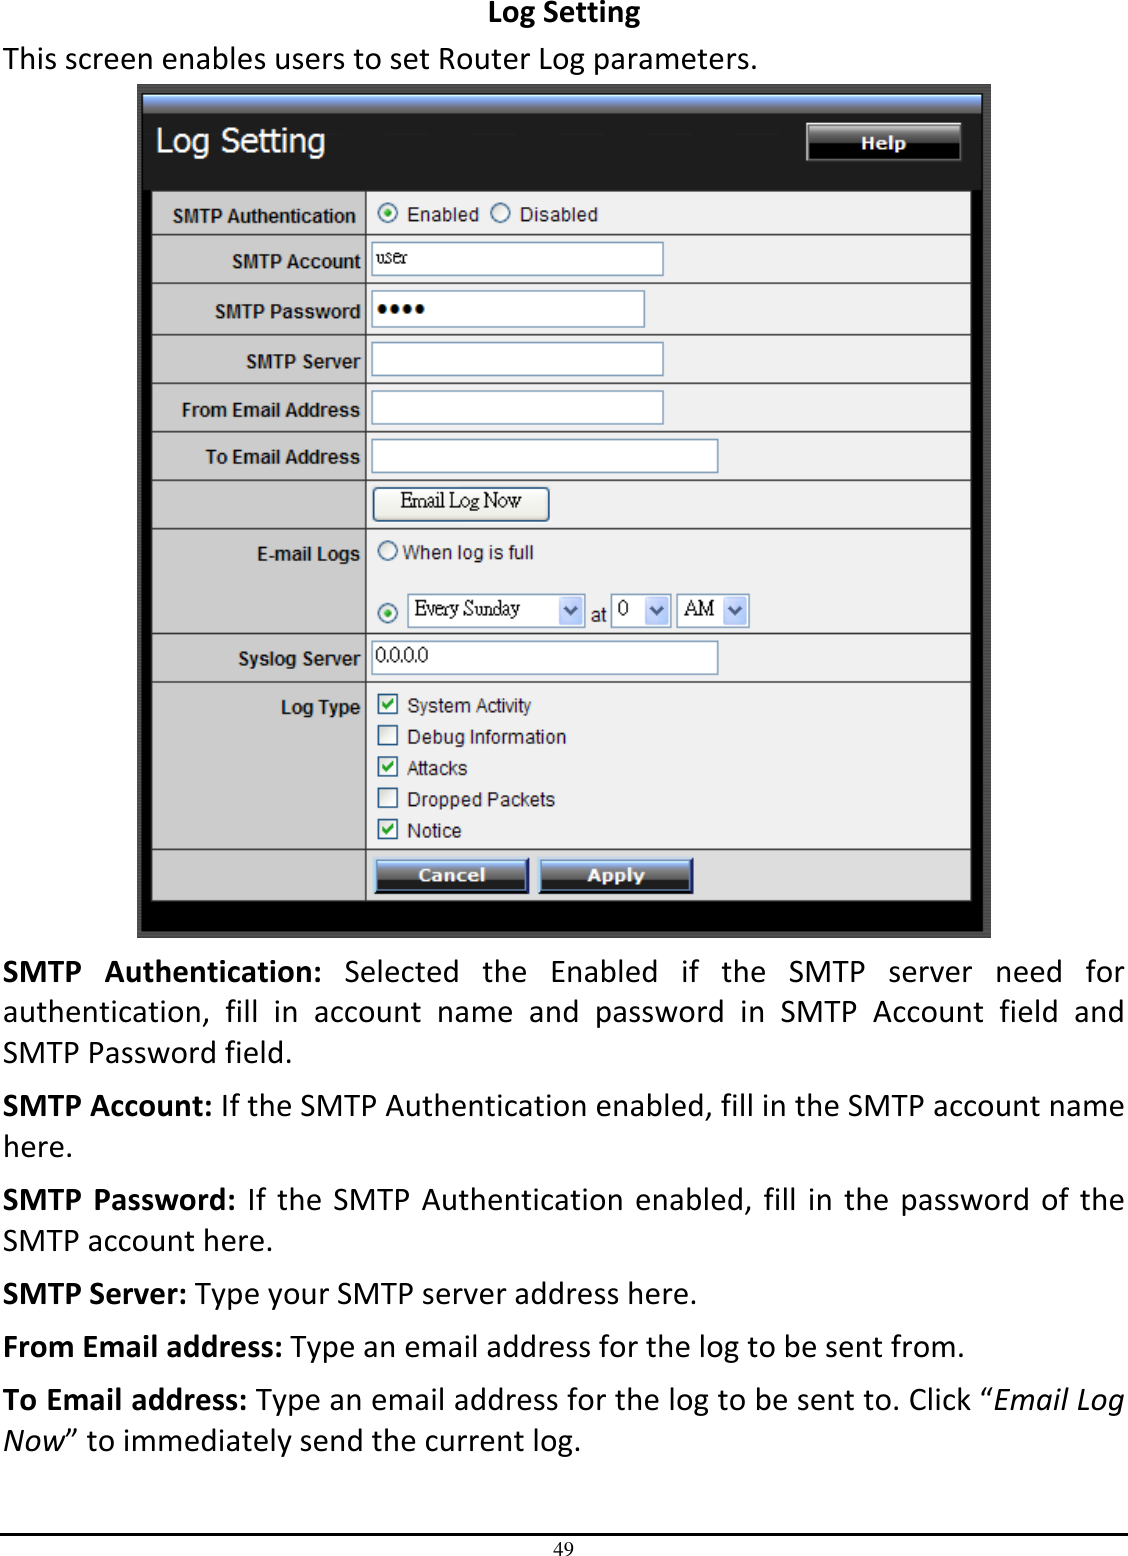 49 Log Setting This screen enables users to set Router Log parameters.  SMTP  Authentication:  Selected  the  Enabled  if  the  SMTP  server  need  for authentication,  fill  in  account  name  and  password  in  SMTP  Account  field  and SMTP Password field. SMTP Account: If the SMTP Authentication enabled, fill in the SMTP account name here. SMTP  Password:  If the SMTP Authentication enabled, fill in the password of the SMTP account here. SMTP Server: Type your SMTP server address here. From Email address: Type an email address for the log to be sent from. To Email address: Type an email address for the log to be sent to. Click “Email Log Now” to immediately send the current log. 